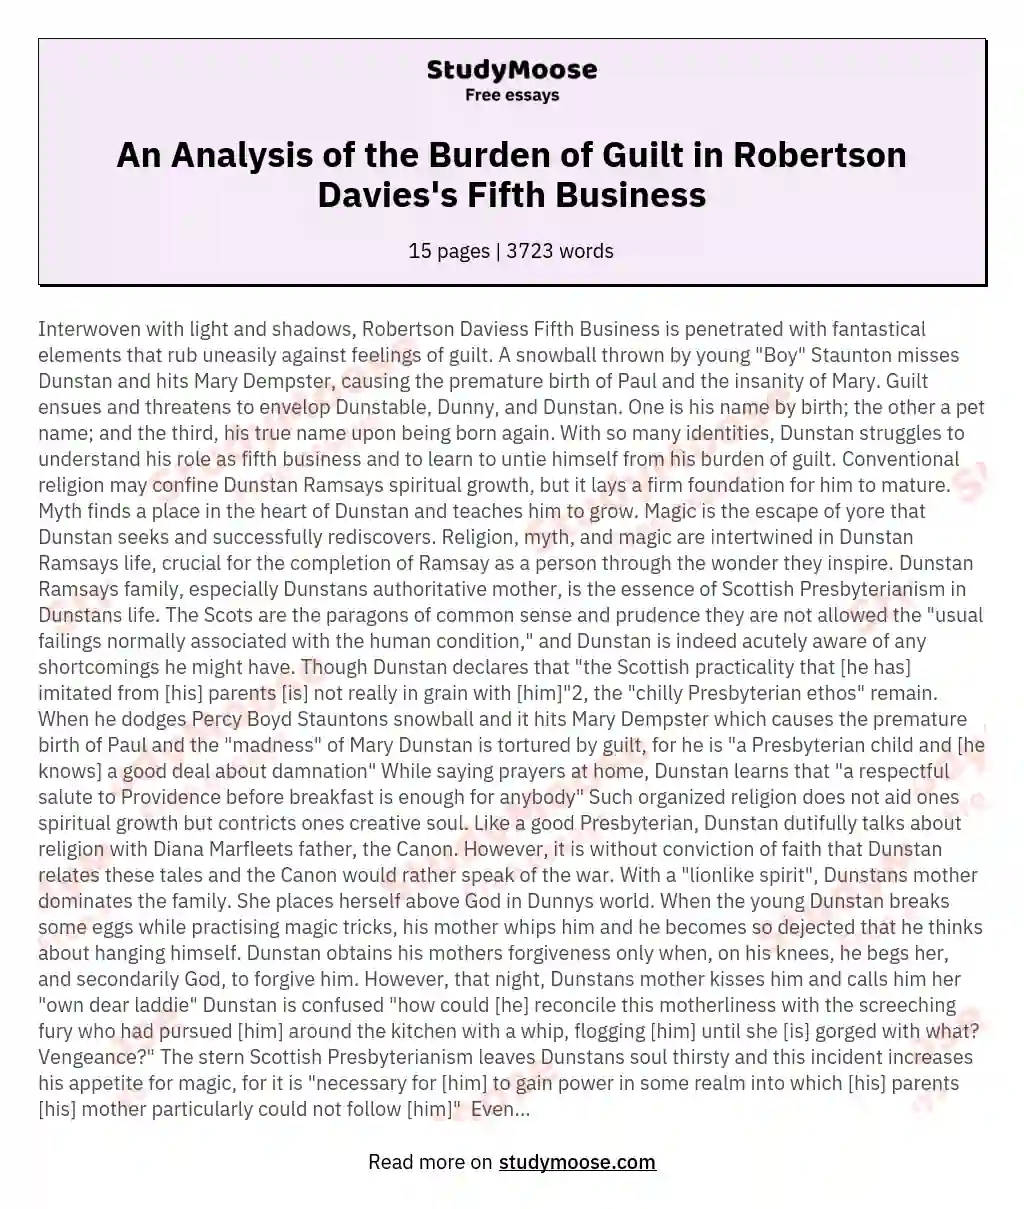 An Analysis of the Burden of Guilt in Robertson Davies's Fifth Business essay